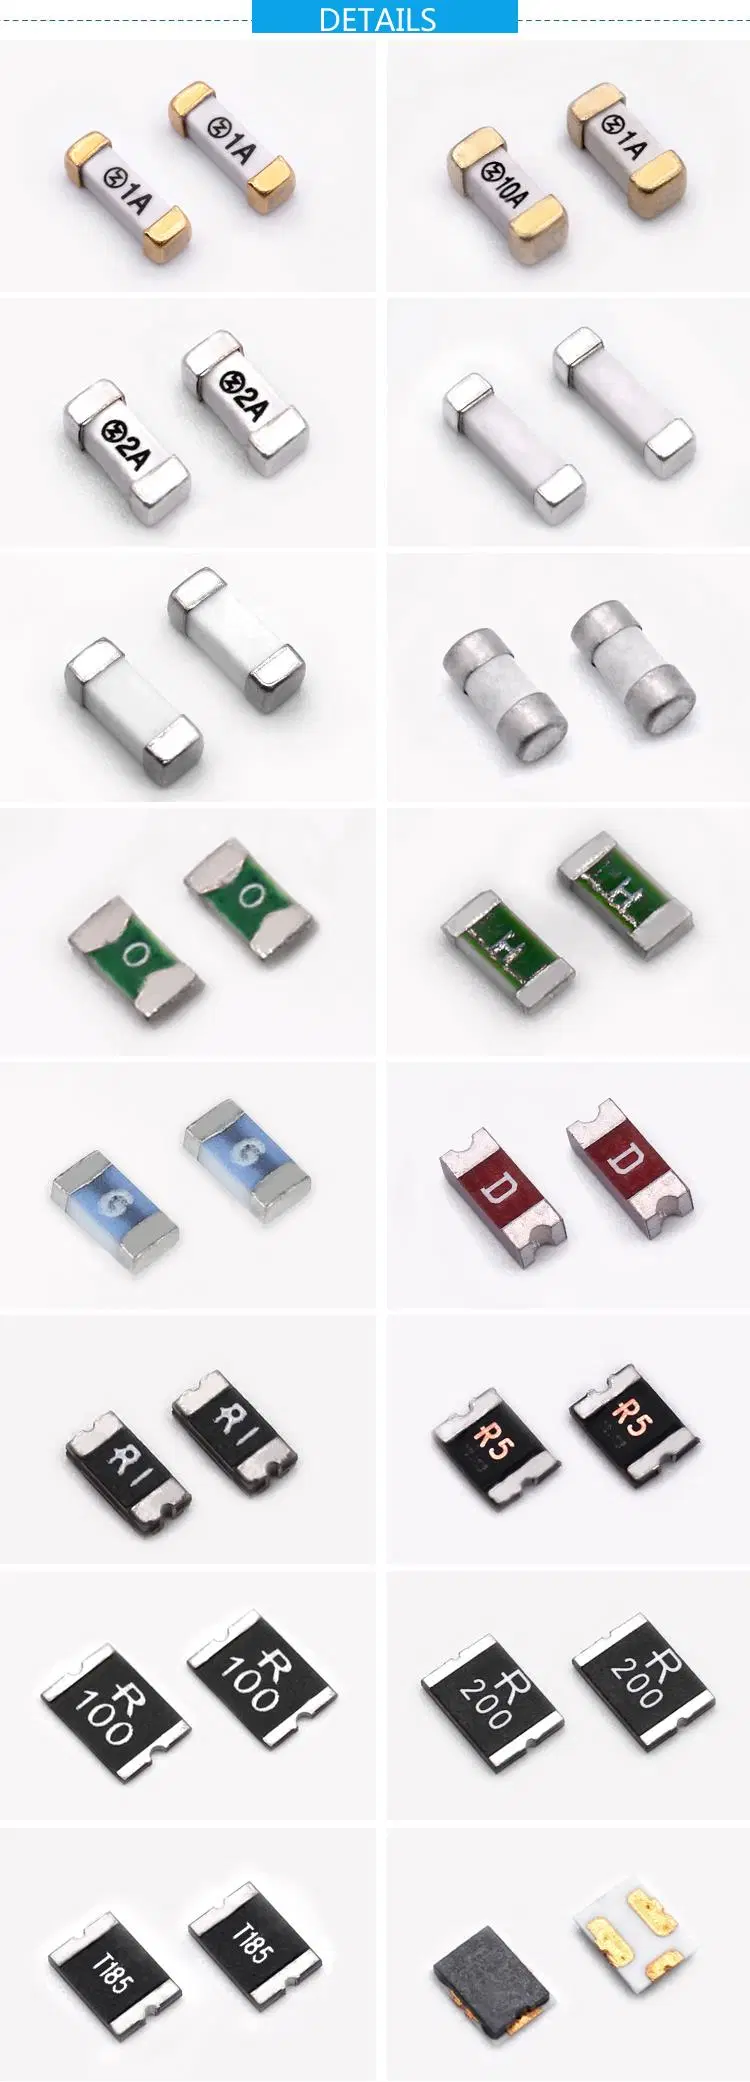 0603 1206 2410 6125 1032 4512 1250 Ceramic Surface Mount Fuse Fast Blow SMD Fuse Time Delay SMD Fuse